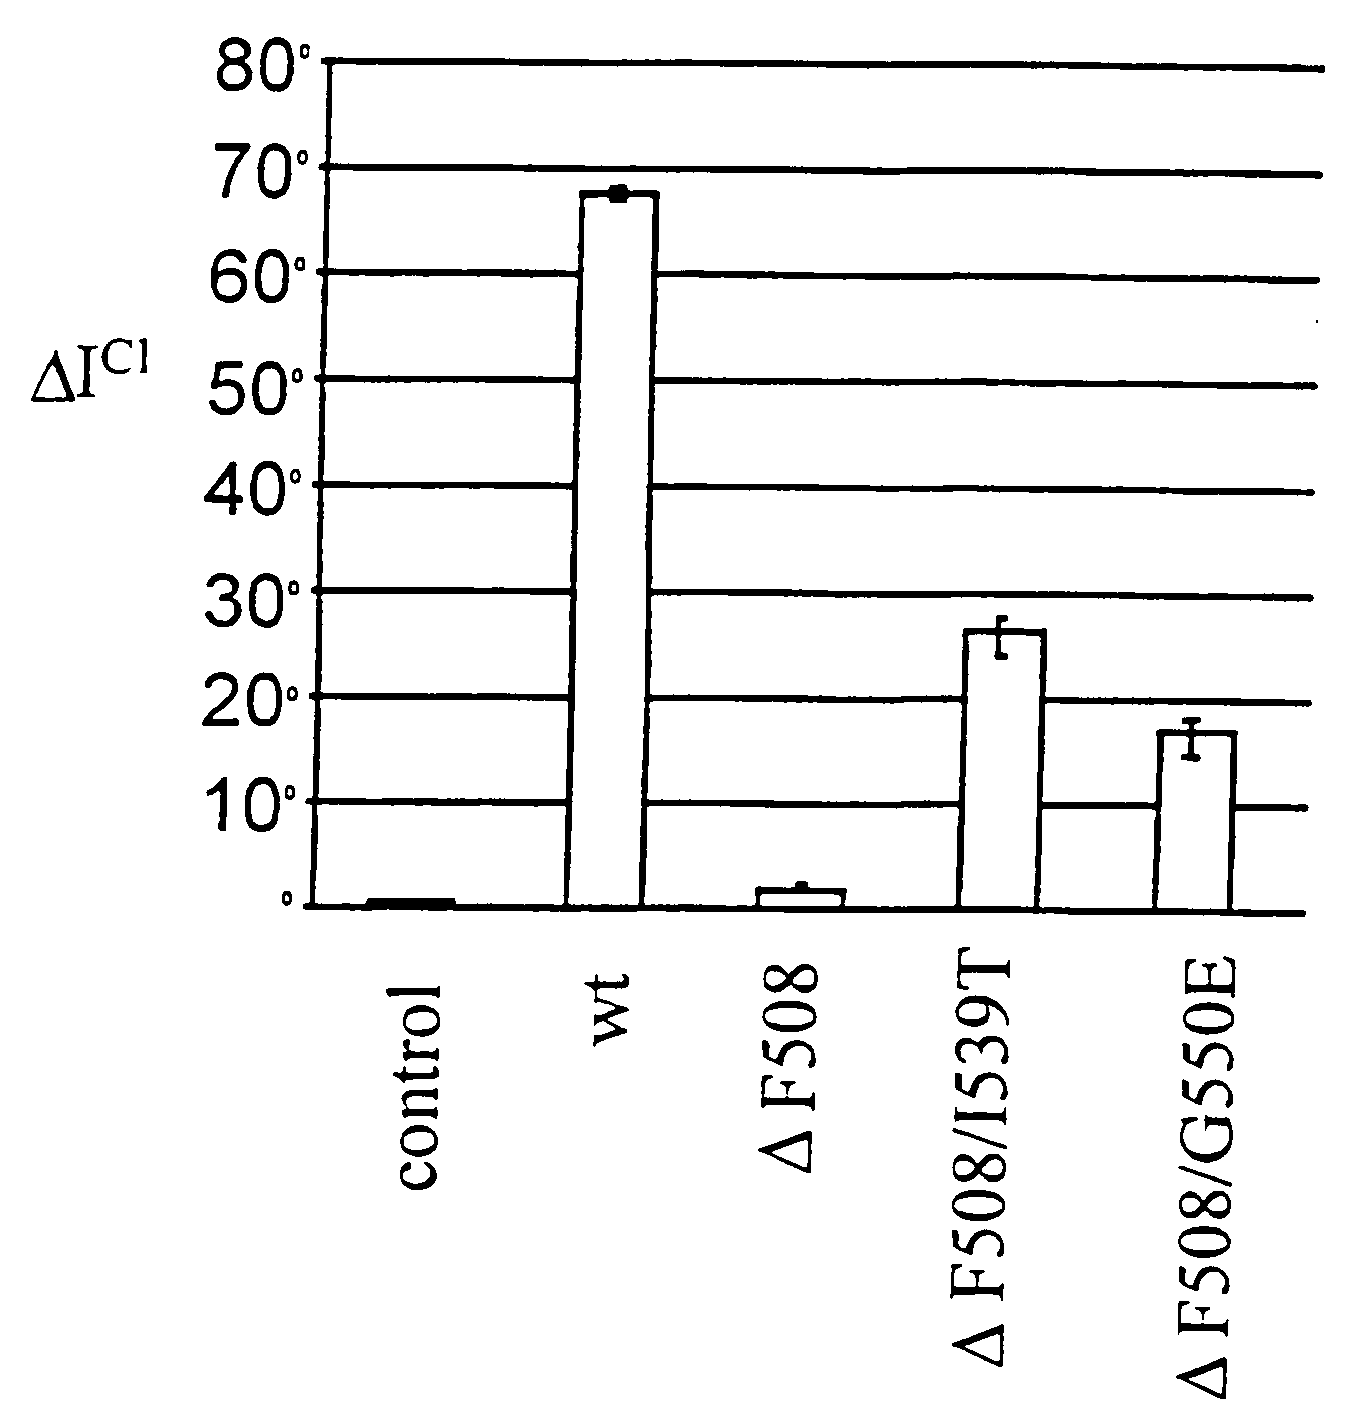 Materials and methods for detecting interaction of CFTR polypeptides